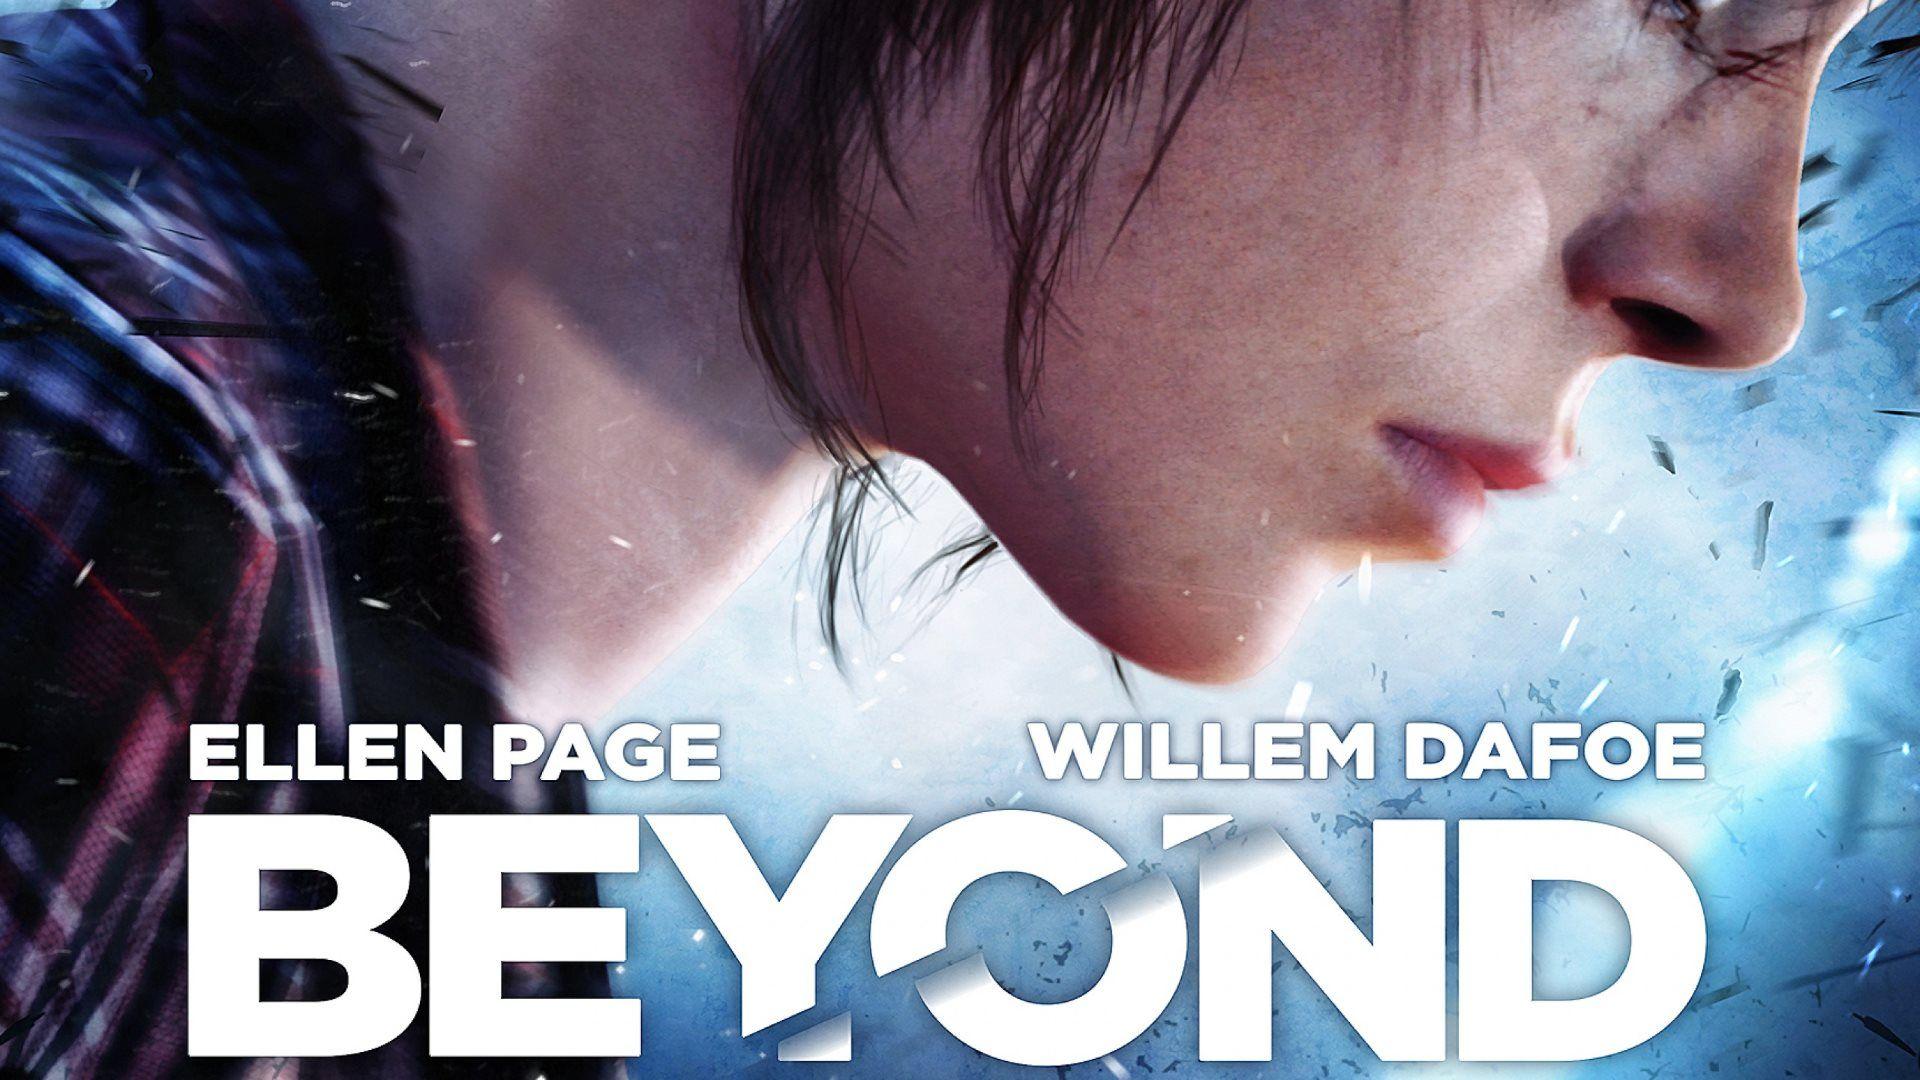 Beyond: Two Souls Wallpaper in HD, 4K and wide sizes